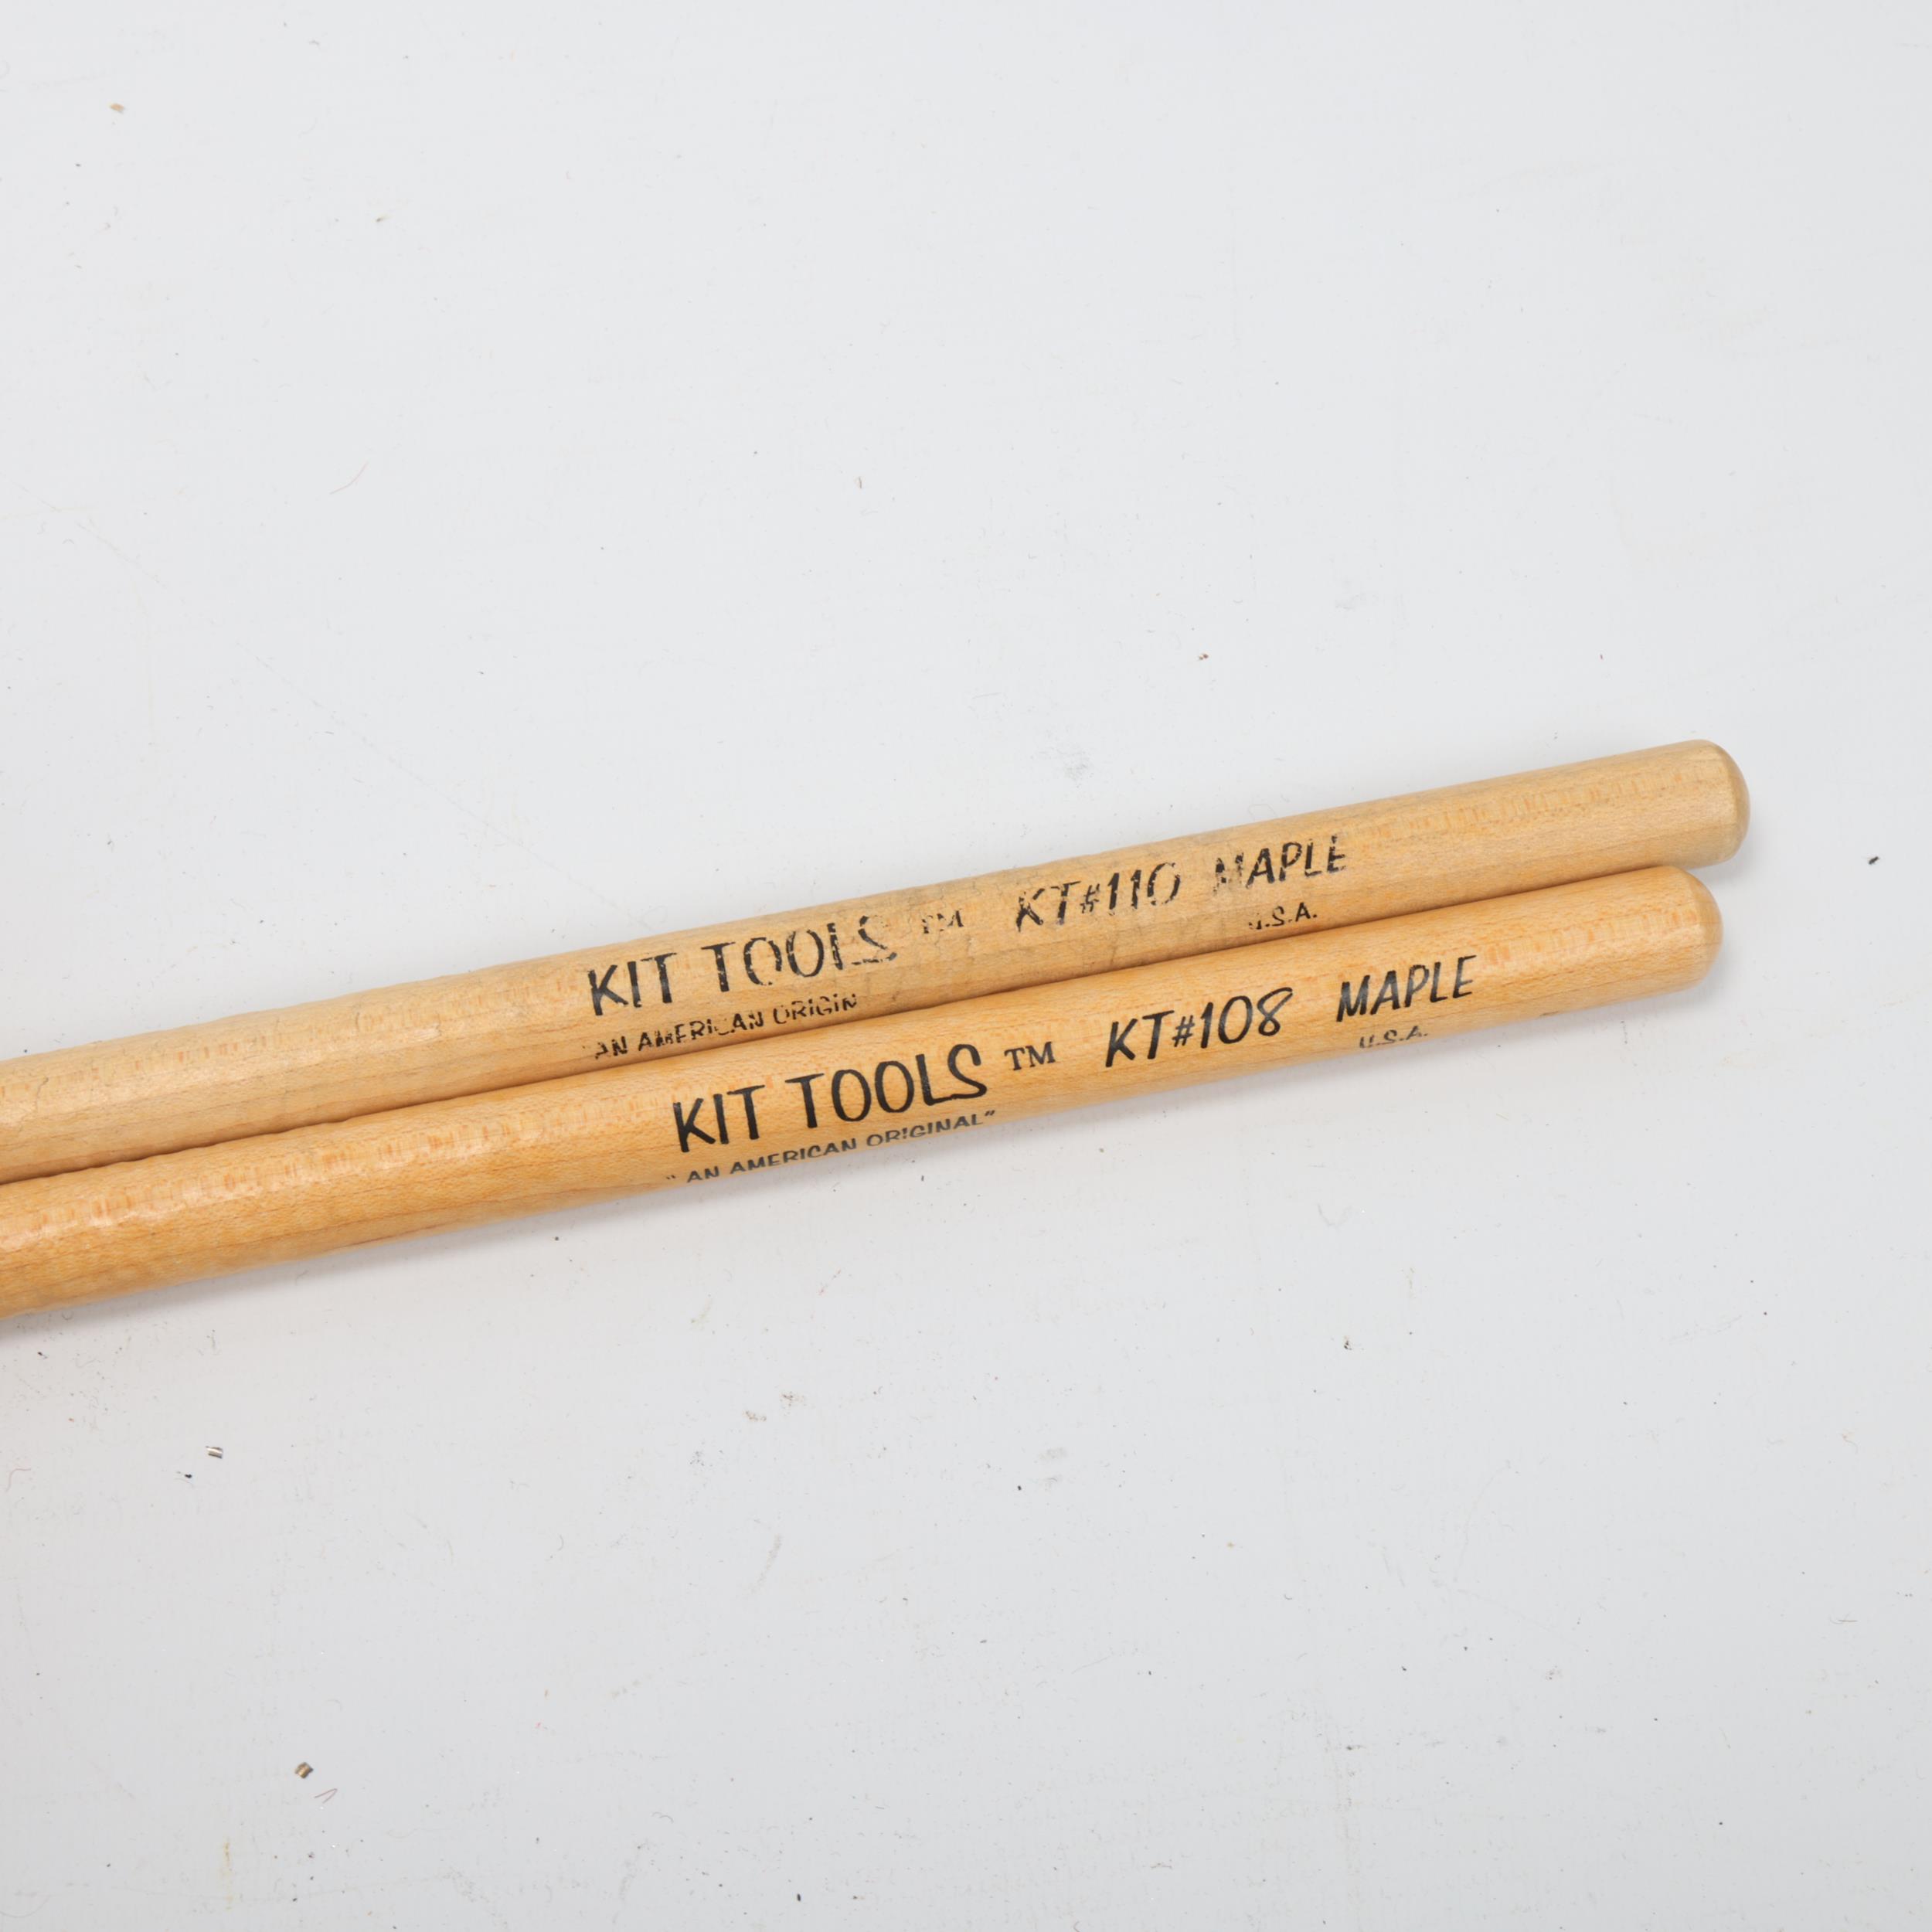 Two USED KIT TOOLS KT Hickory DRUMSTICKS belonging to MITCH MITCHELL - Image 2 of 3